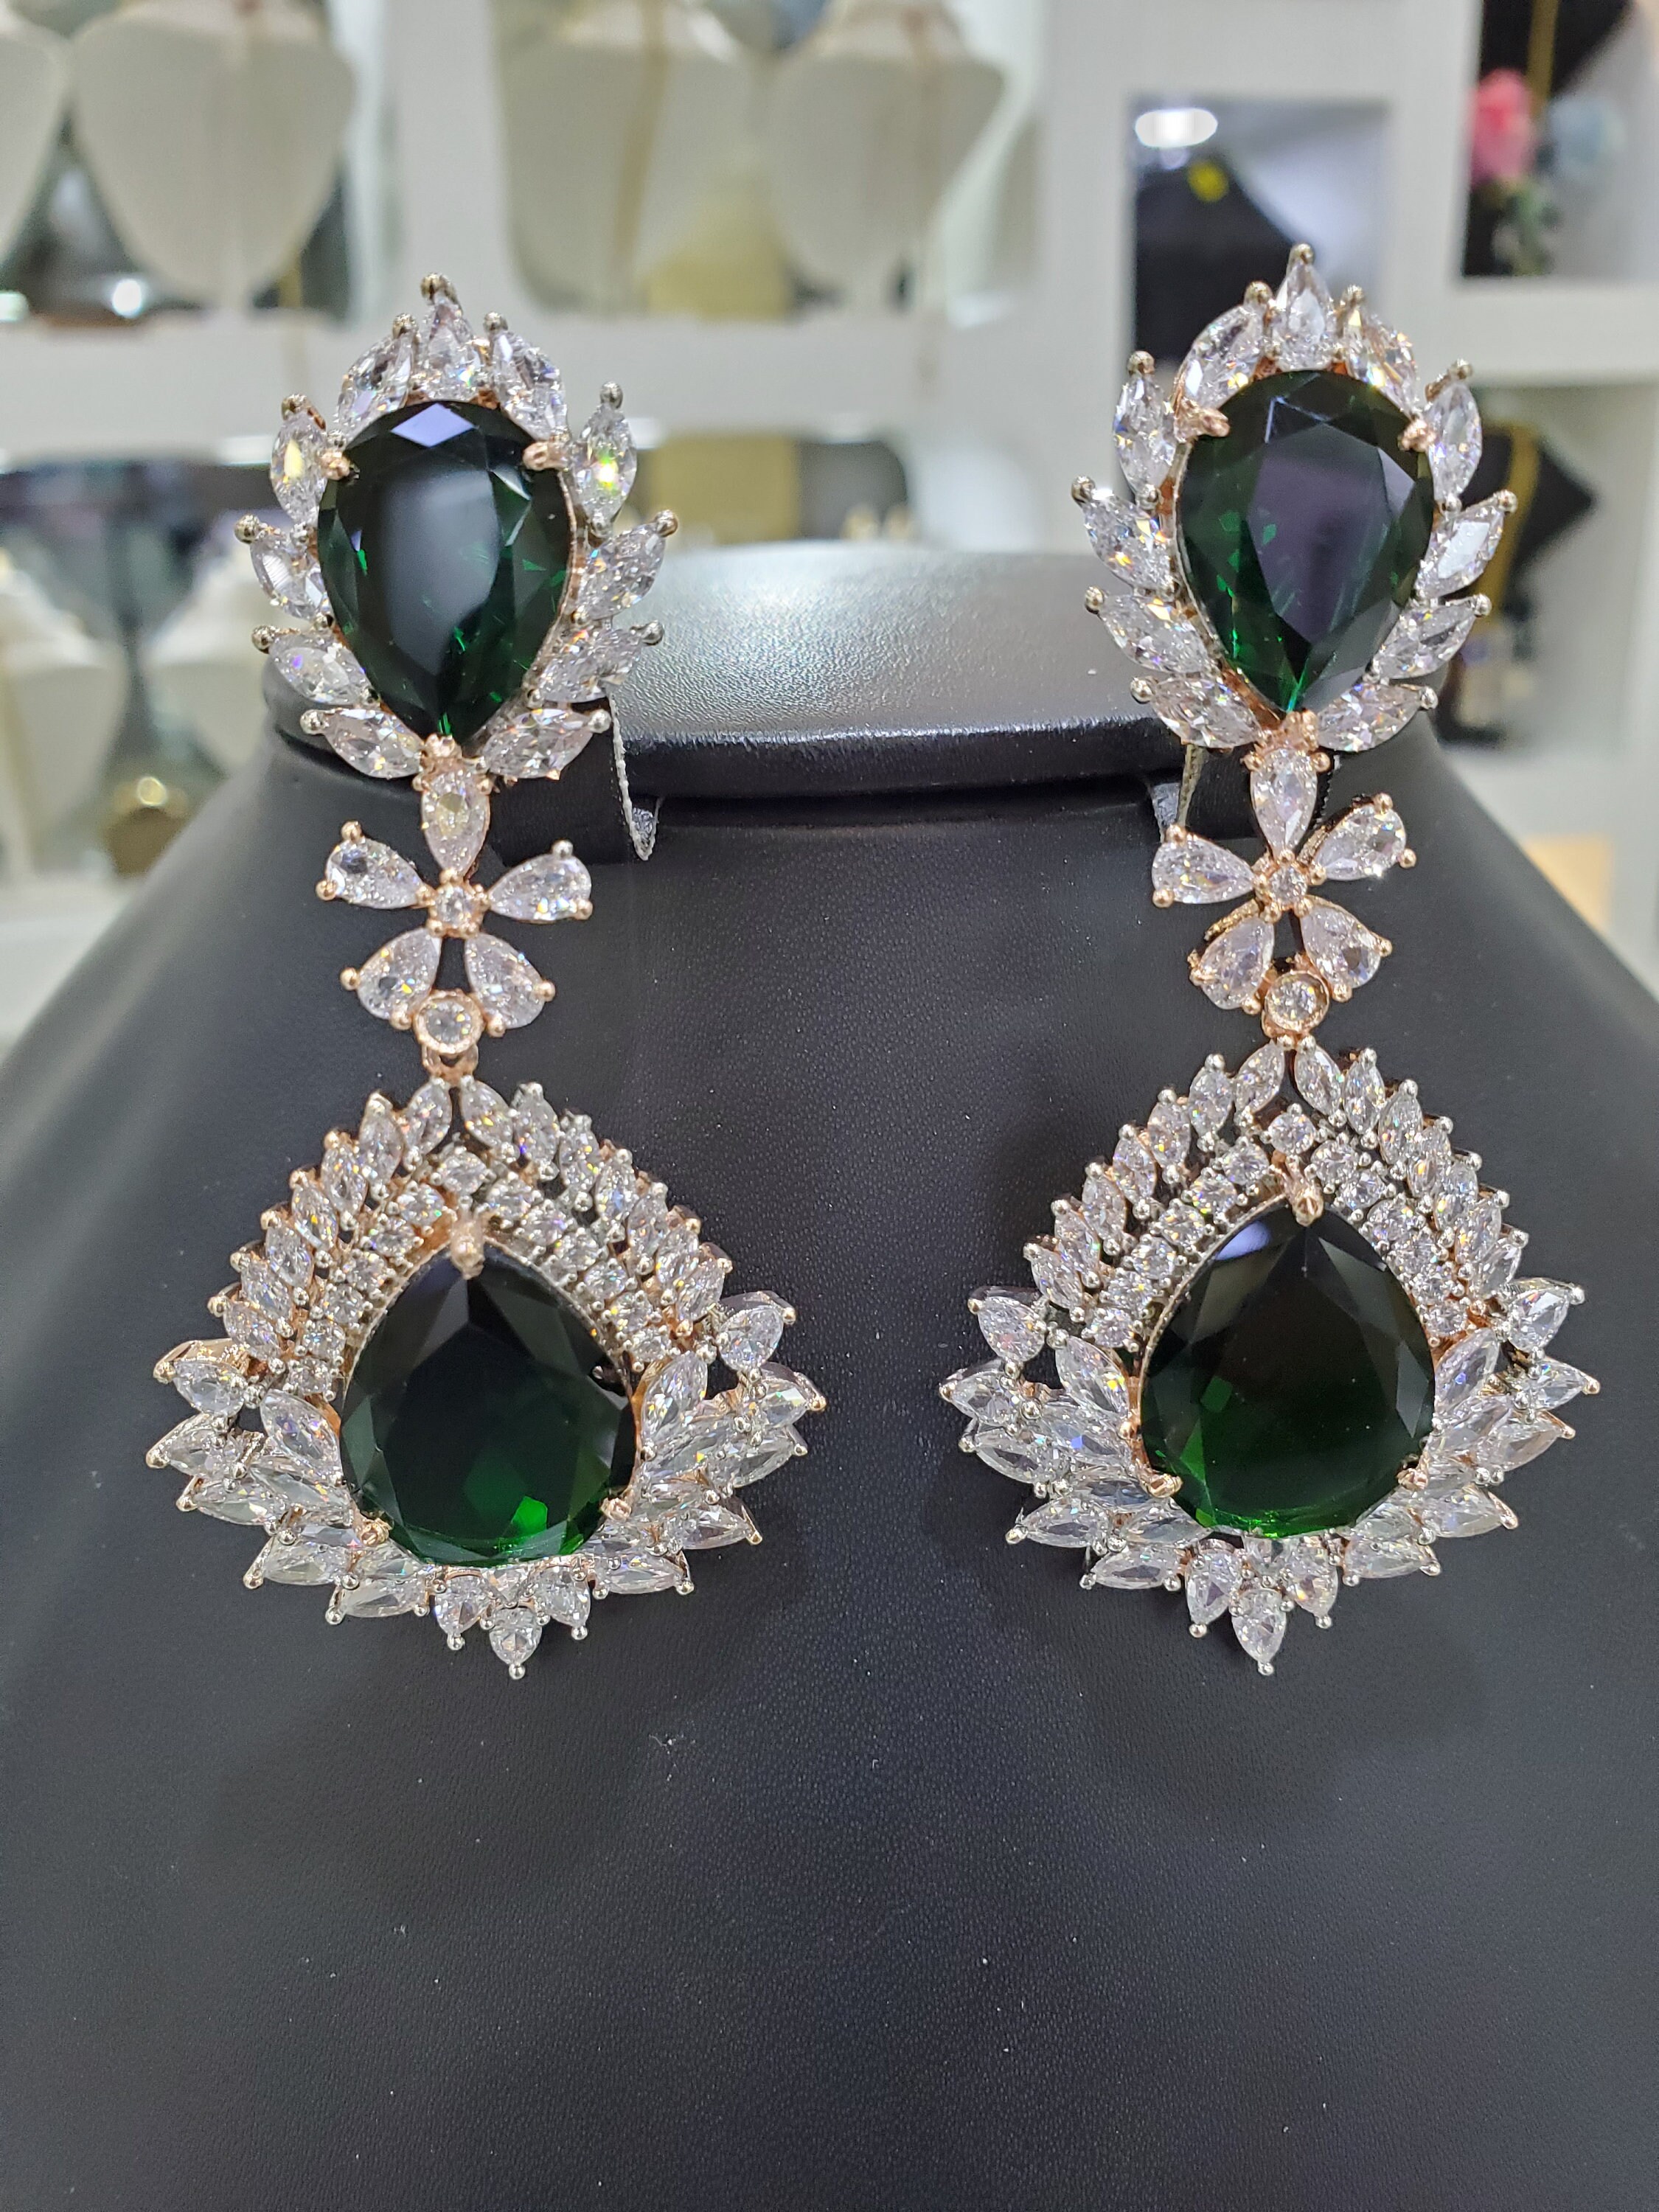 Indian Silver Plated Bollywood AD CZ Emerald Necklace Earrings Jewelry Set